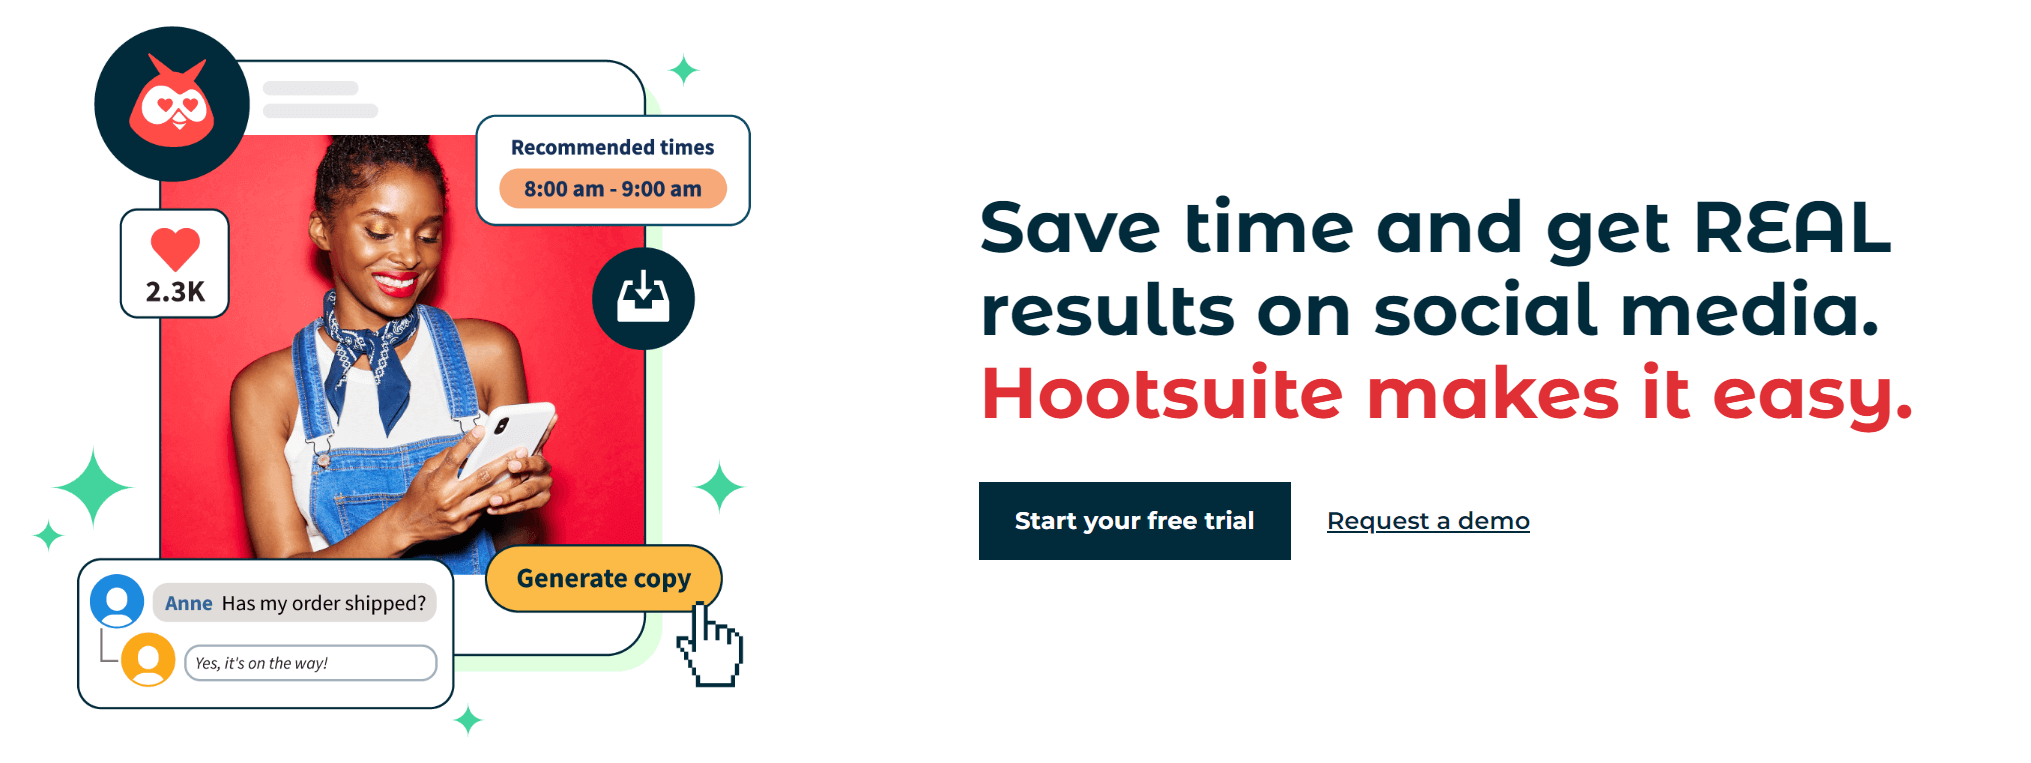 Hootsuite: How to scale a photography business with automation tools 